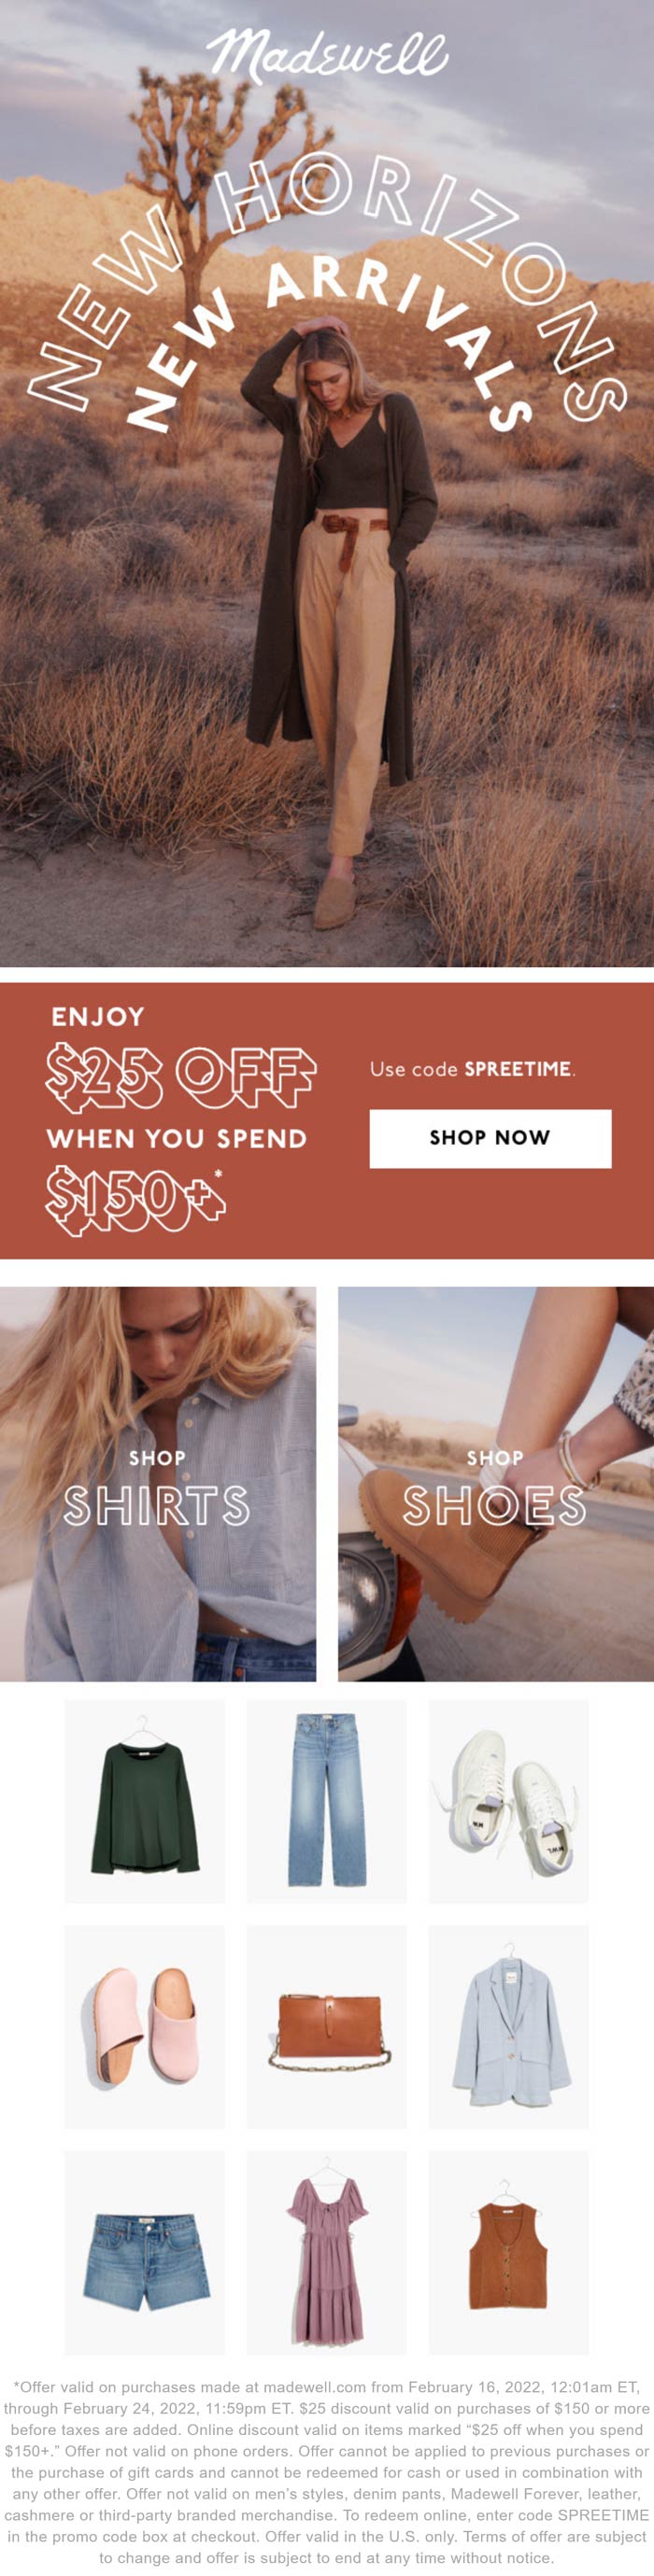 Madewell stores Coupon  $25 off $150 online at Madewell via promo code SPREETIME #madewell 